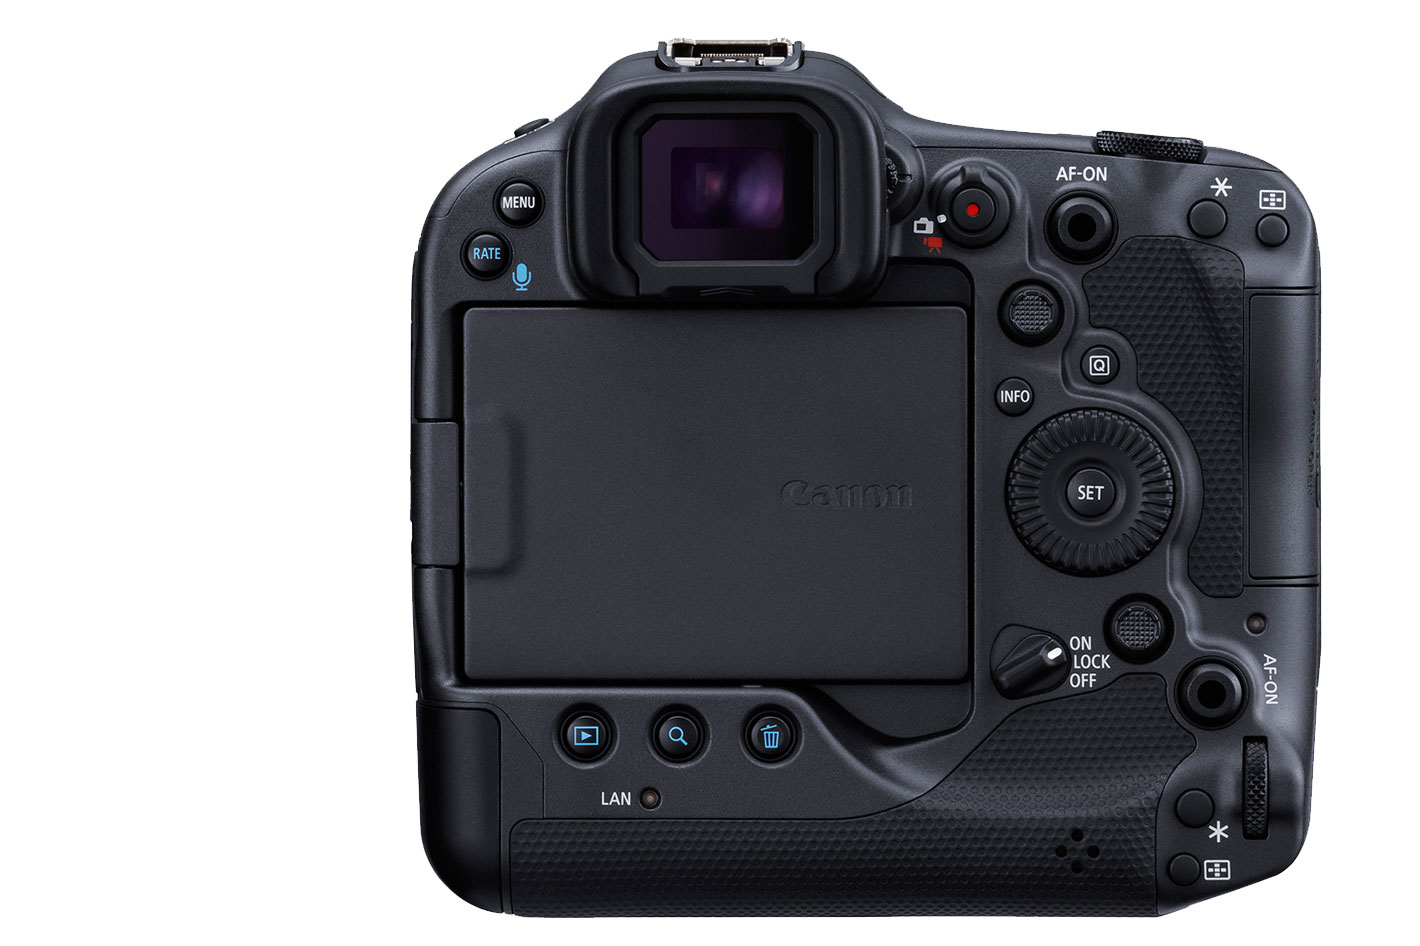 Canon EOS R3: built to outperform and outpace the competition